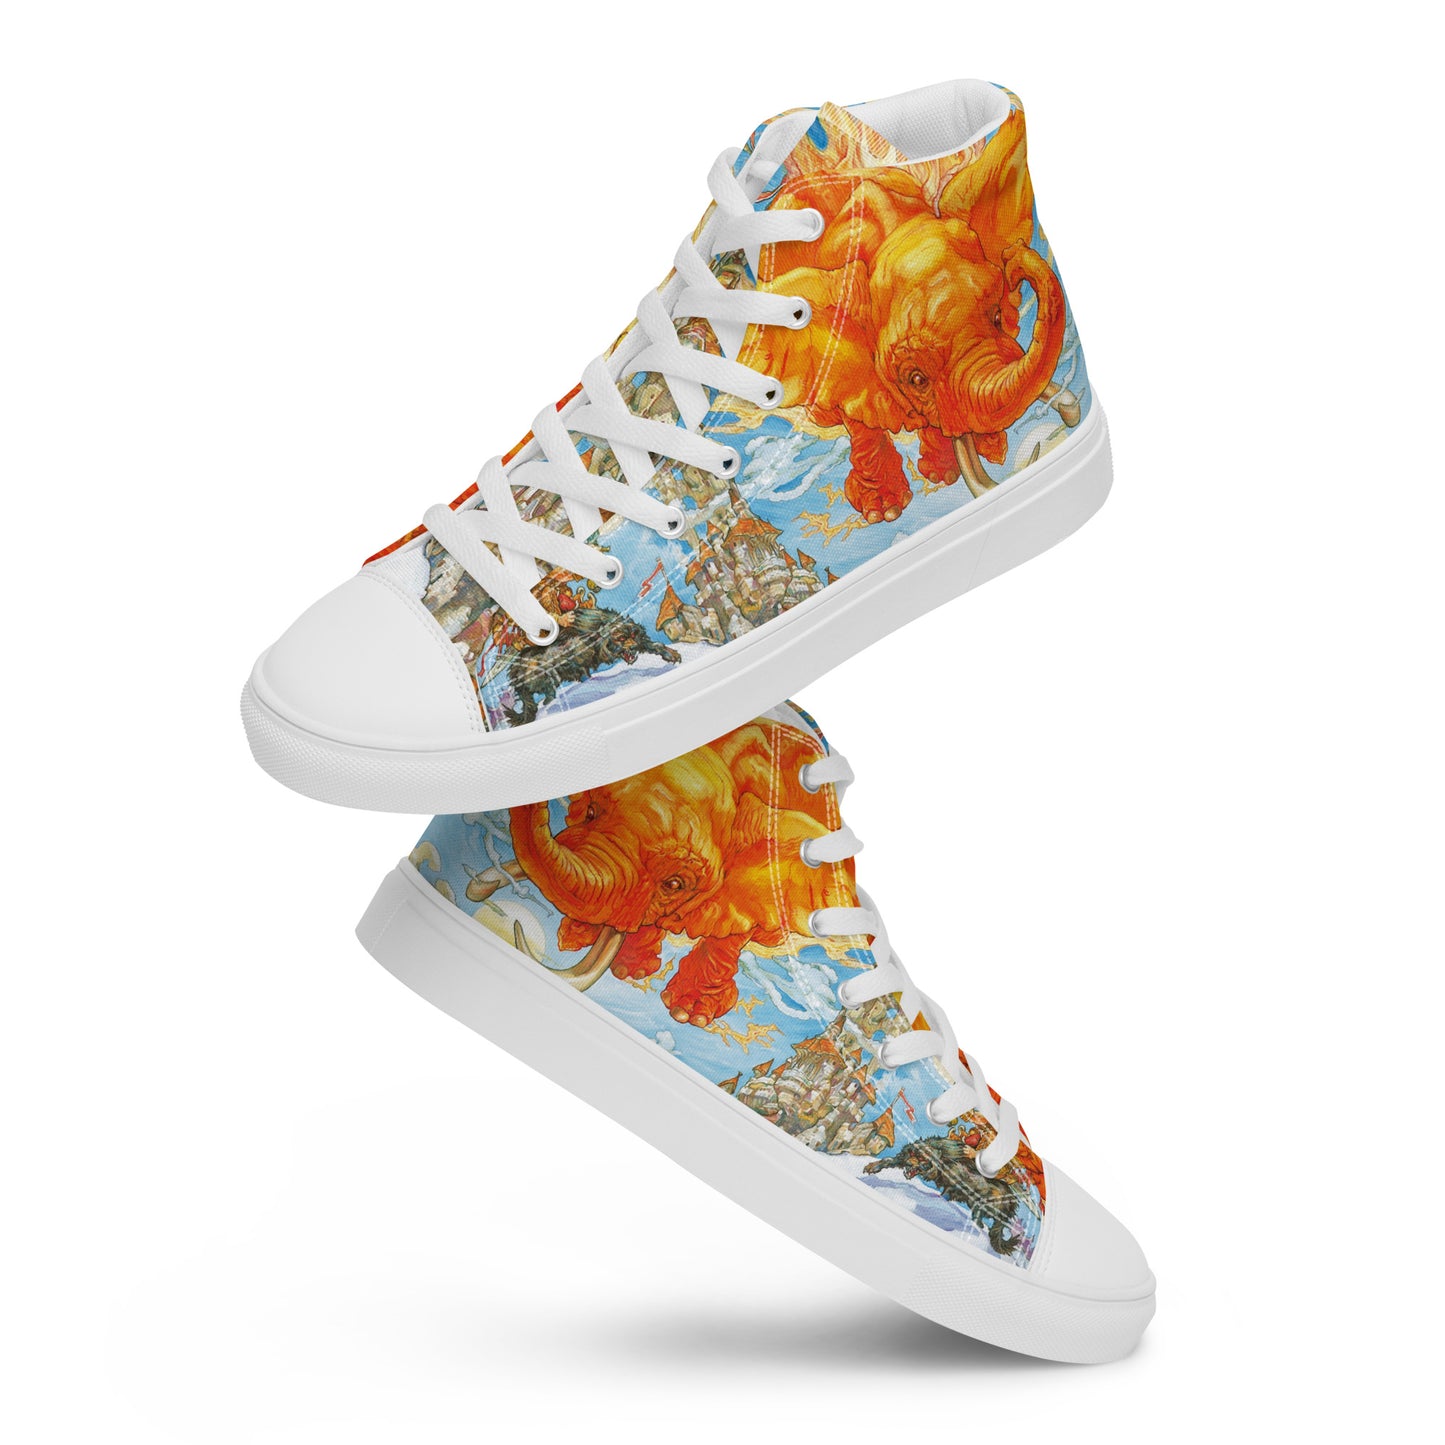 Women’s Fifth Elephant High Top Canvas Shoes - Free Shipping! *US SIZES SHOWN! USE CHART!